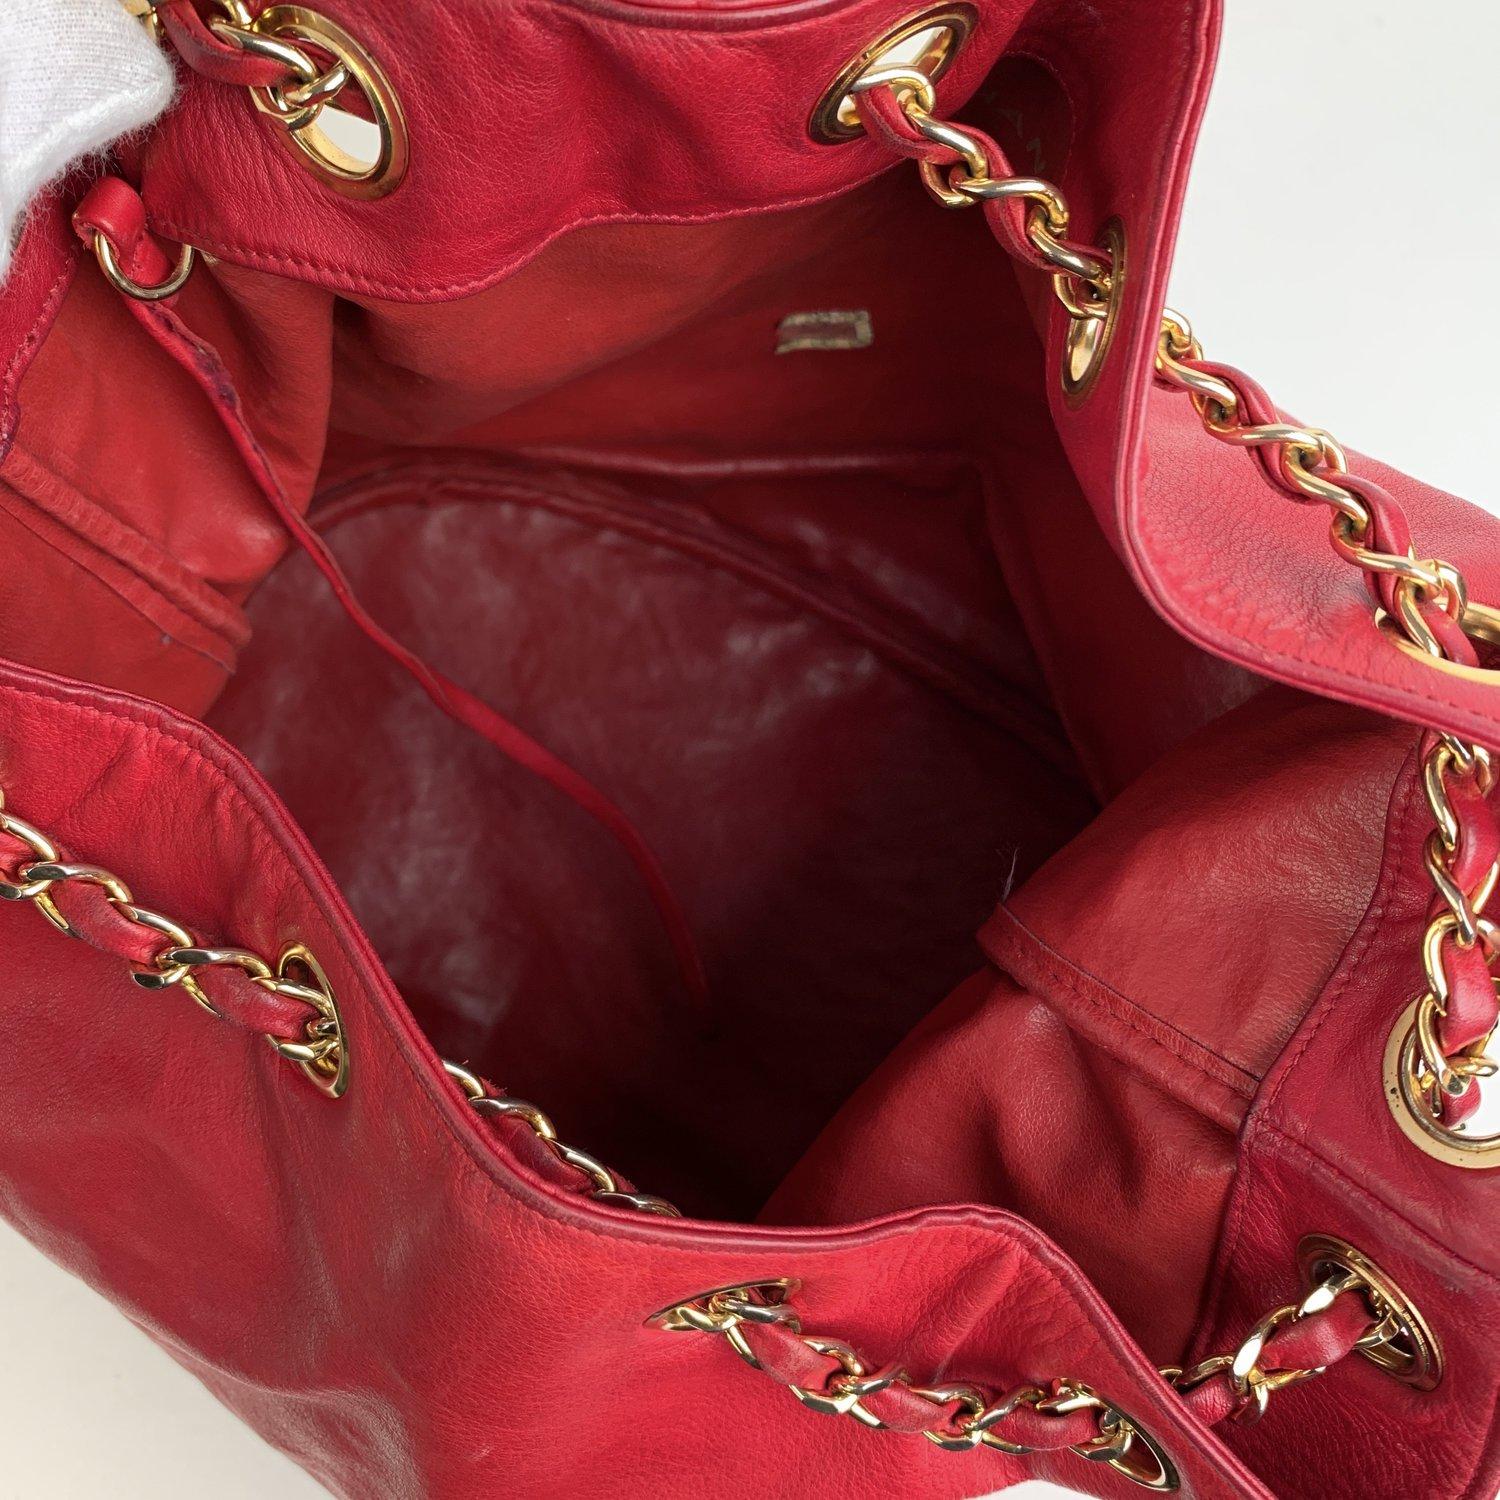 Chanel Vintage Red Leather Bucket Shoulder Bag with Bottom Quilting 4